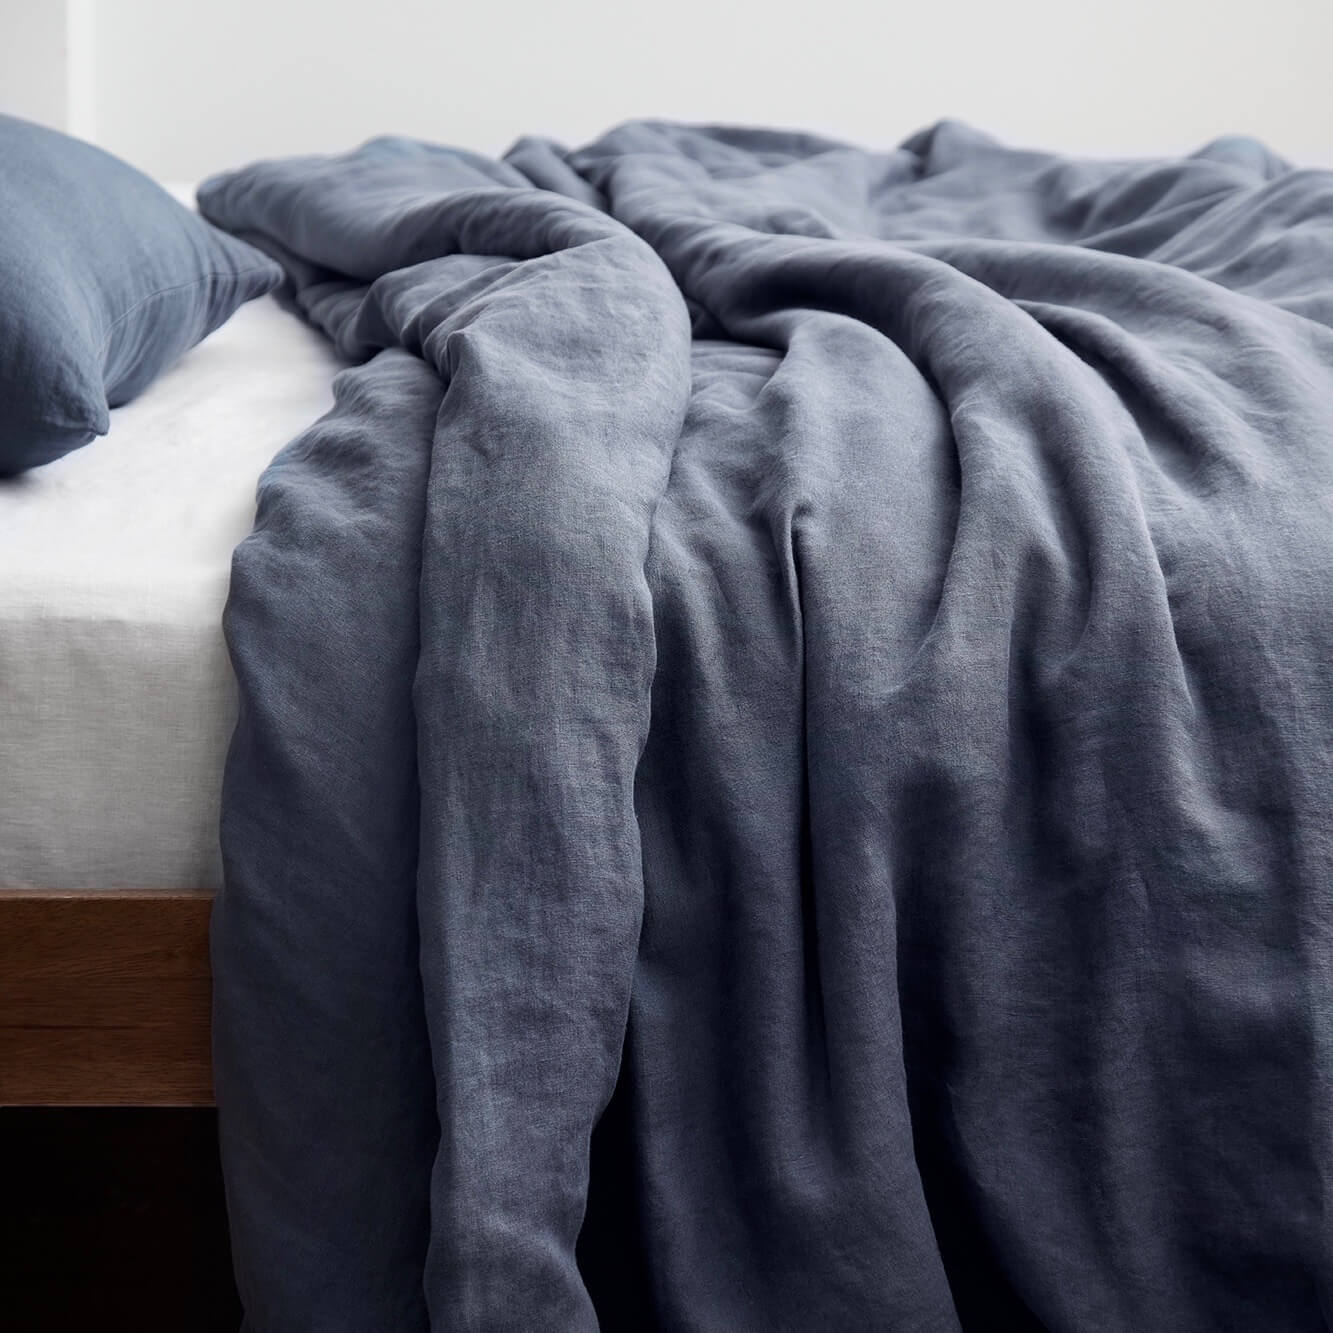 The Citizenry Stonewashed Linen Duvet Cover | Full/Queen | Duvet Only | Sienna - Image 9